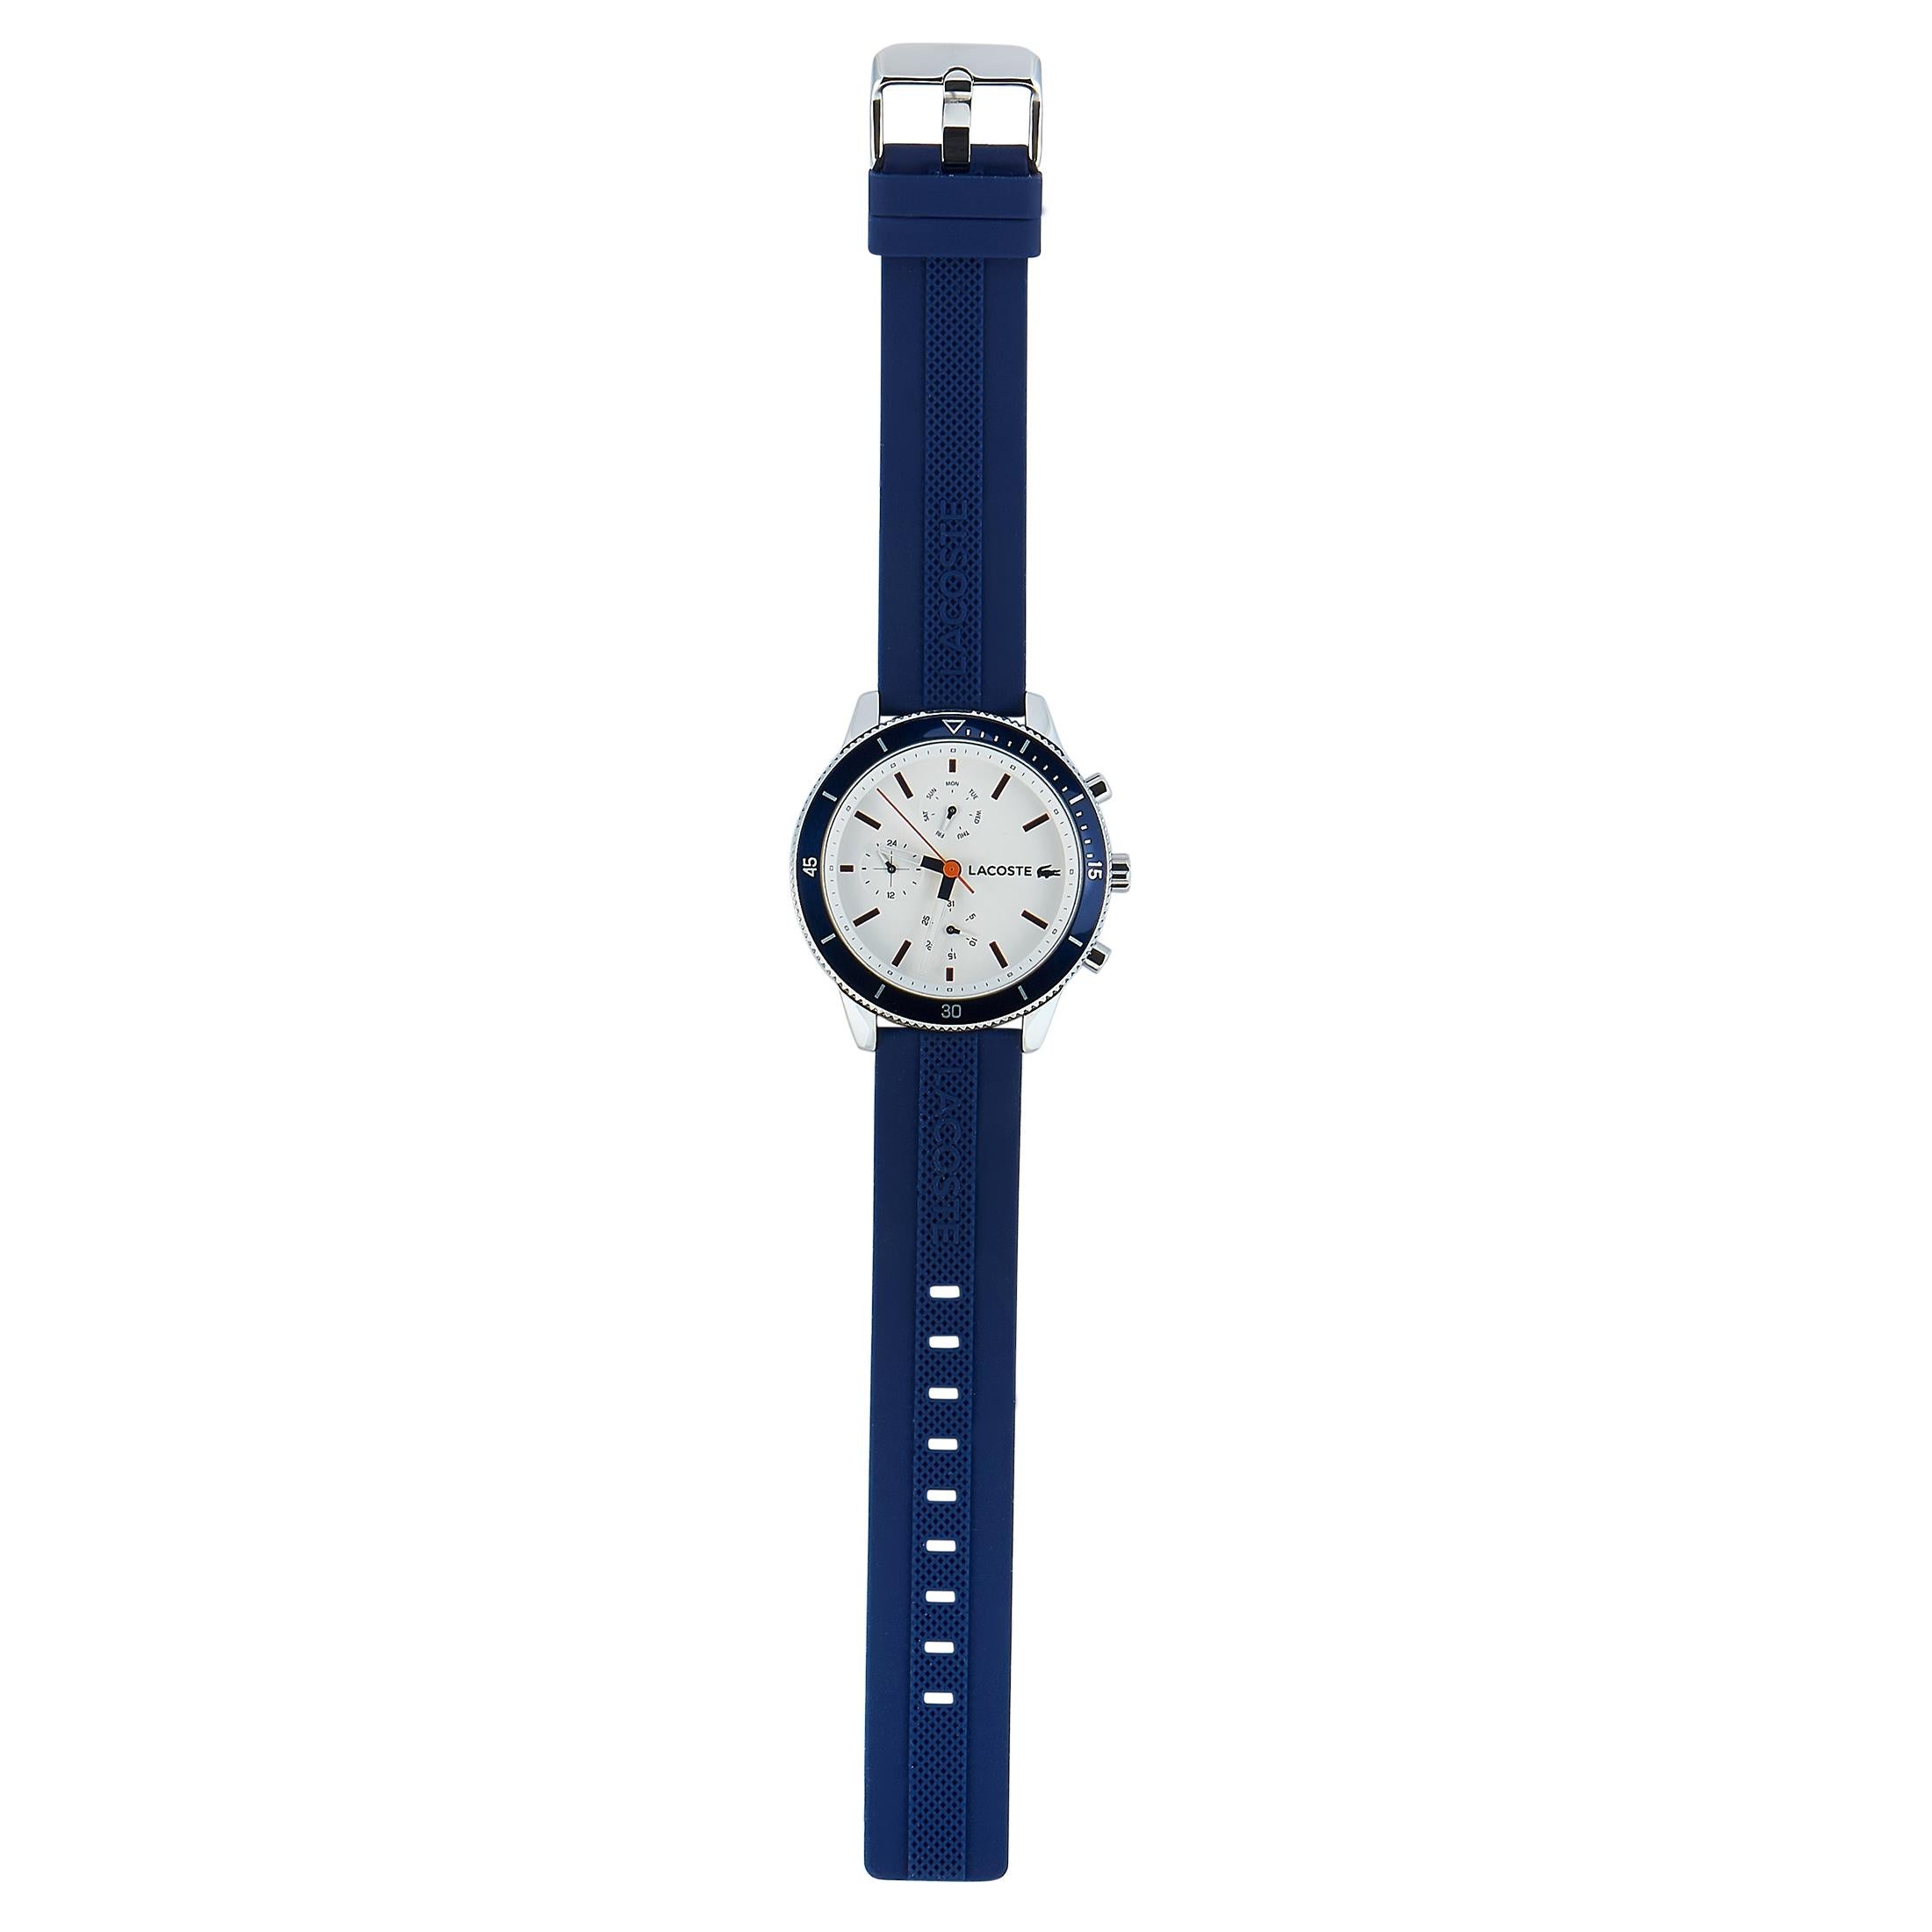 This is the Lacoste Key West watch, reference number 2010993.

It is presented with a 44 mm stainless steel case fitted with a blue aluminum bezel. The case is water-resistant to 50 meters and mounted onto a blue silicone strap, secured on the wrist